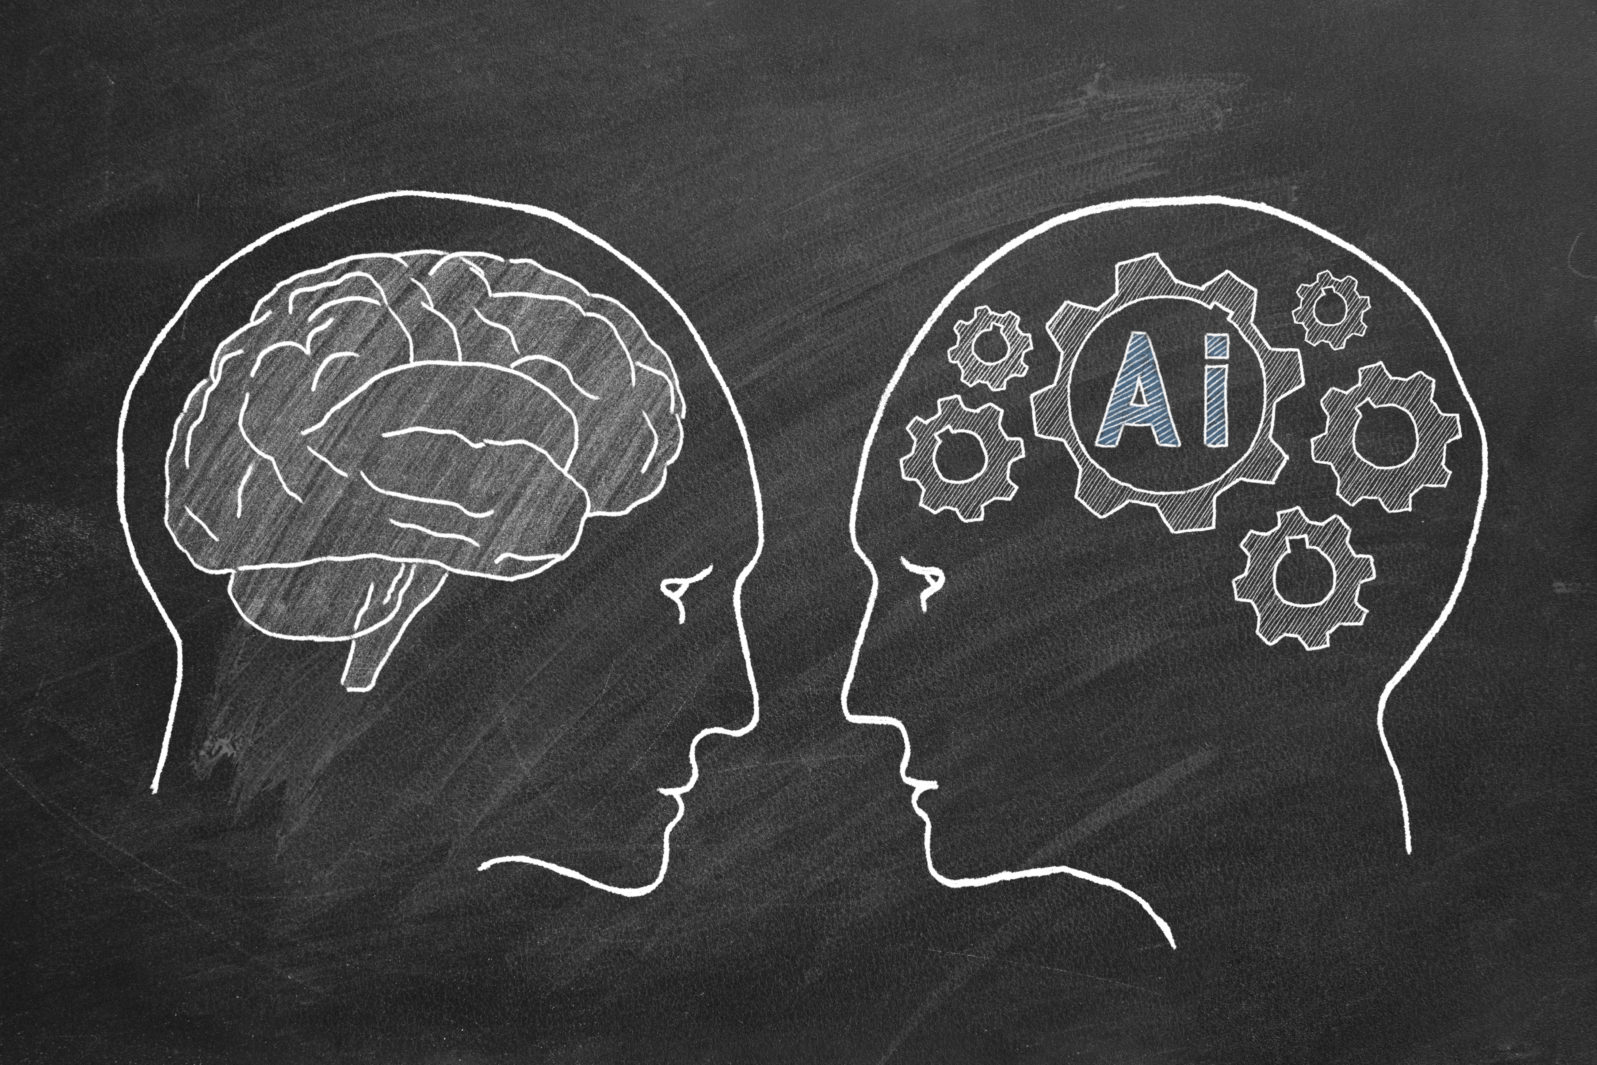 Human intelligence vs artificial intelligence. Face to face. Duel of views. Animated illustration on a school blackboard.